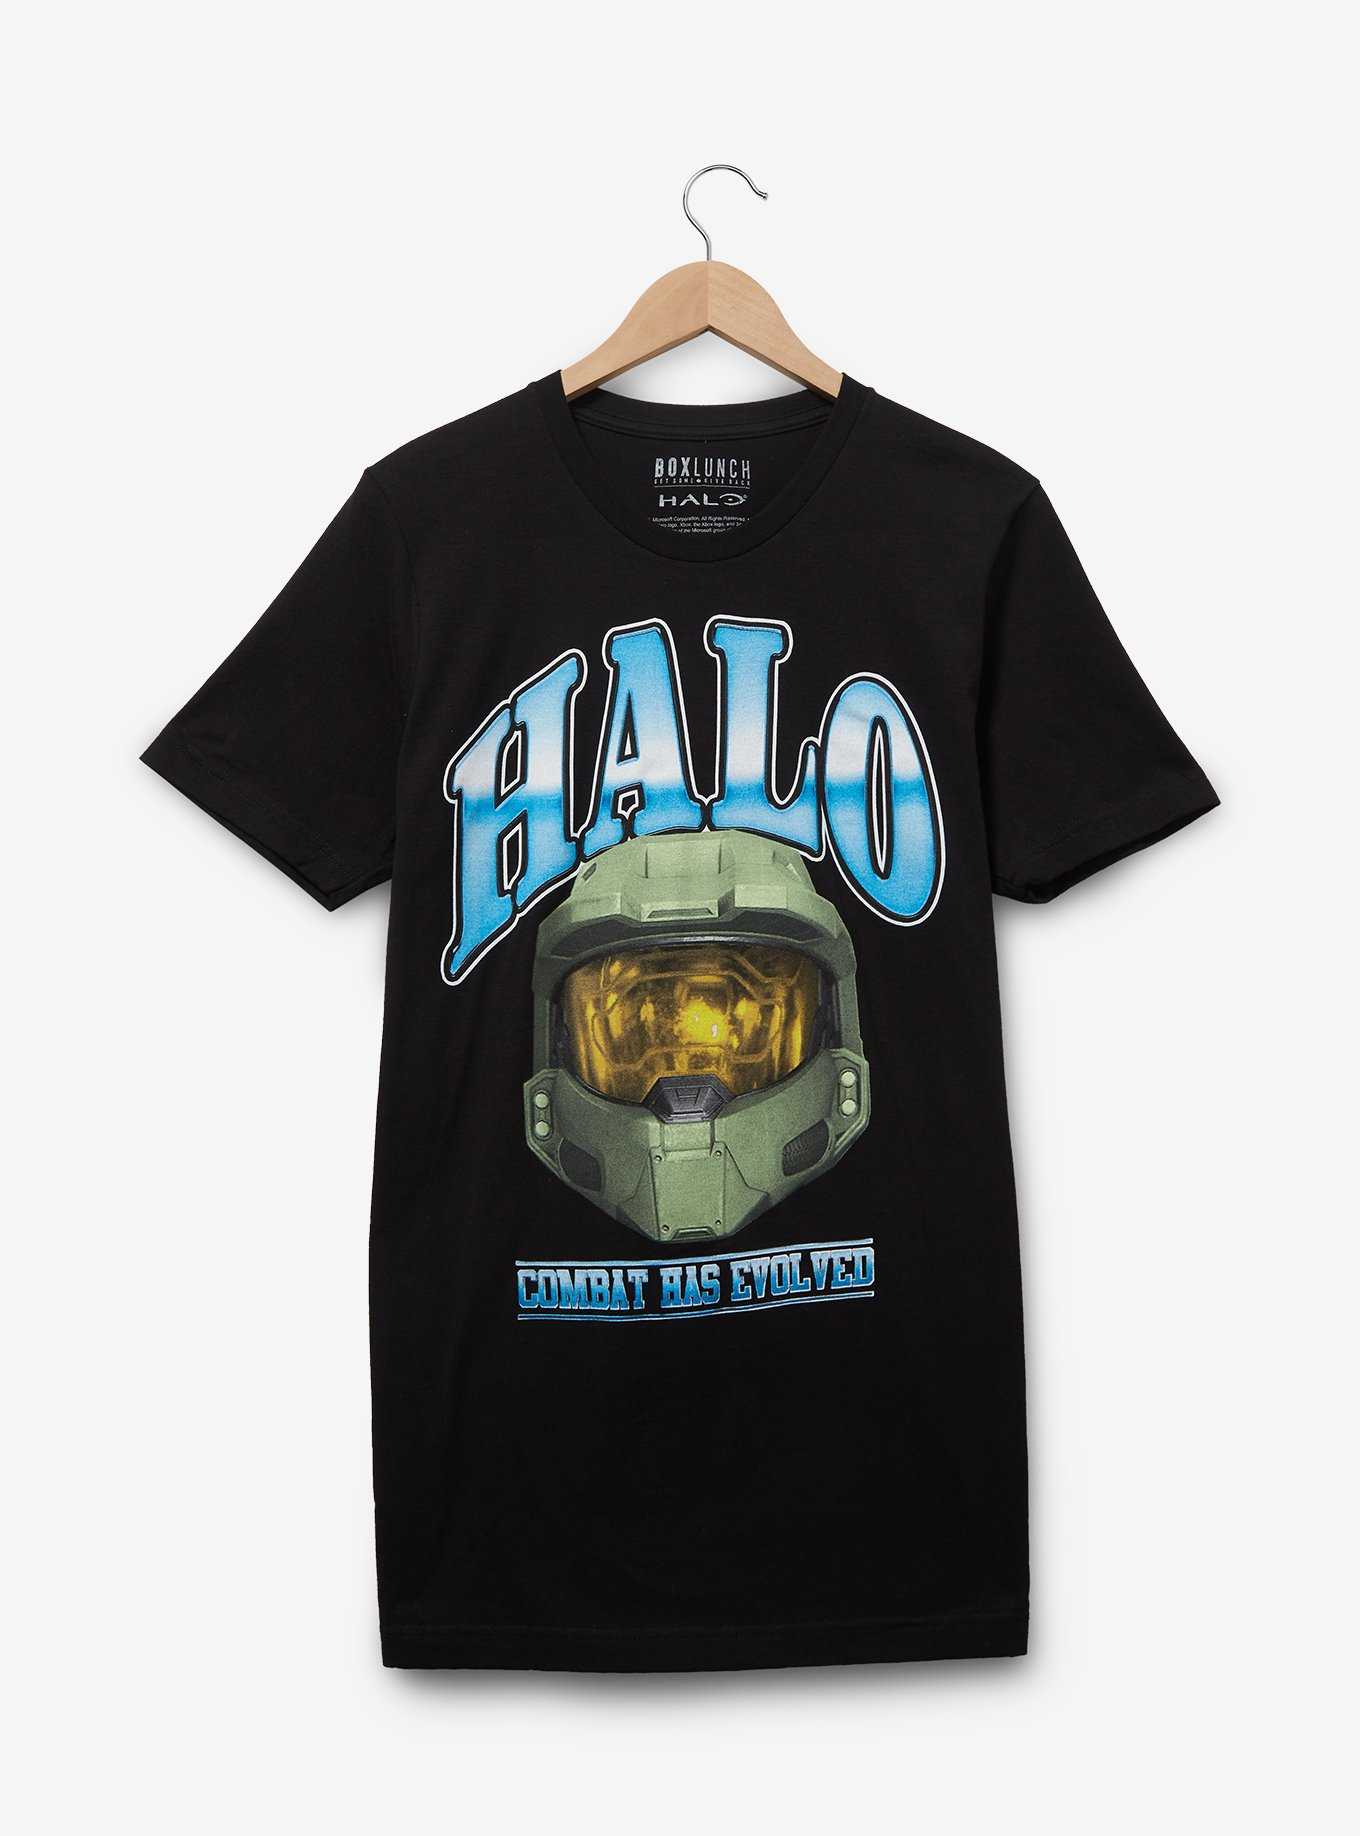 Halo Master Chief Helmet Retro Style T-Shirt - BoxLunch Exclusive, , hi-res